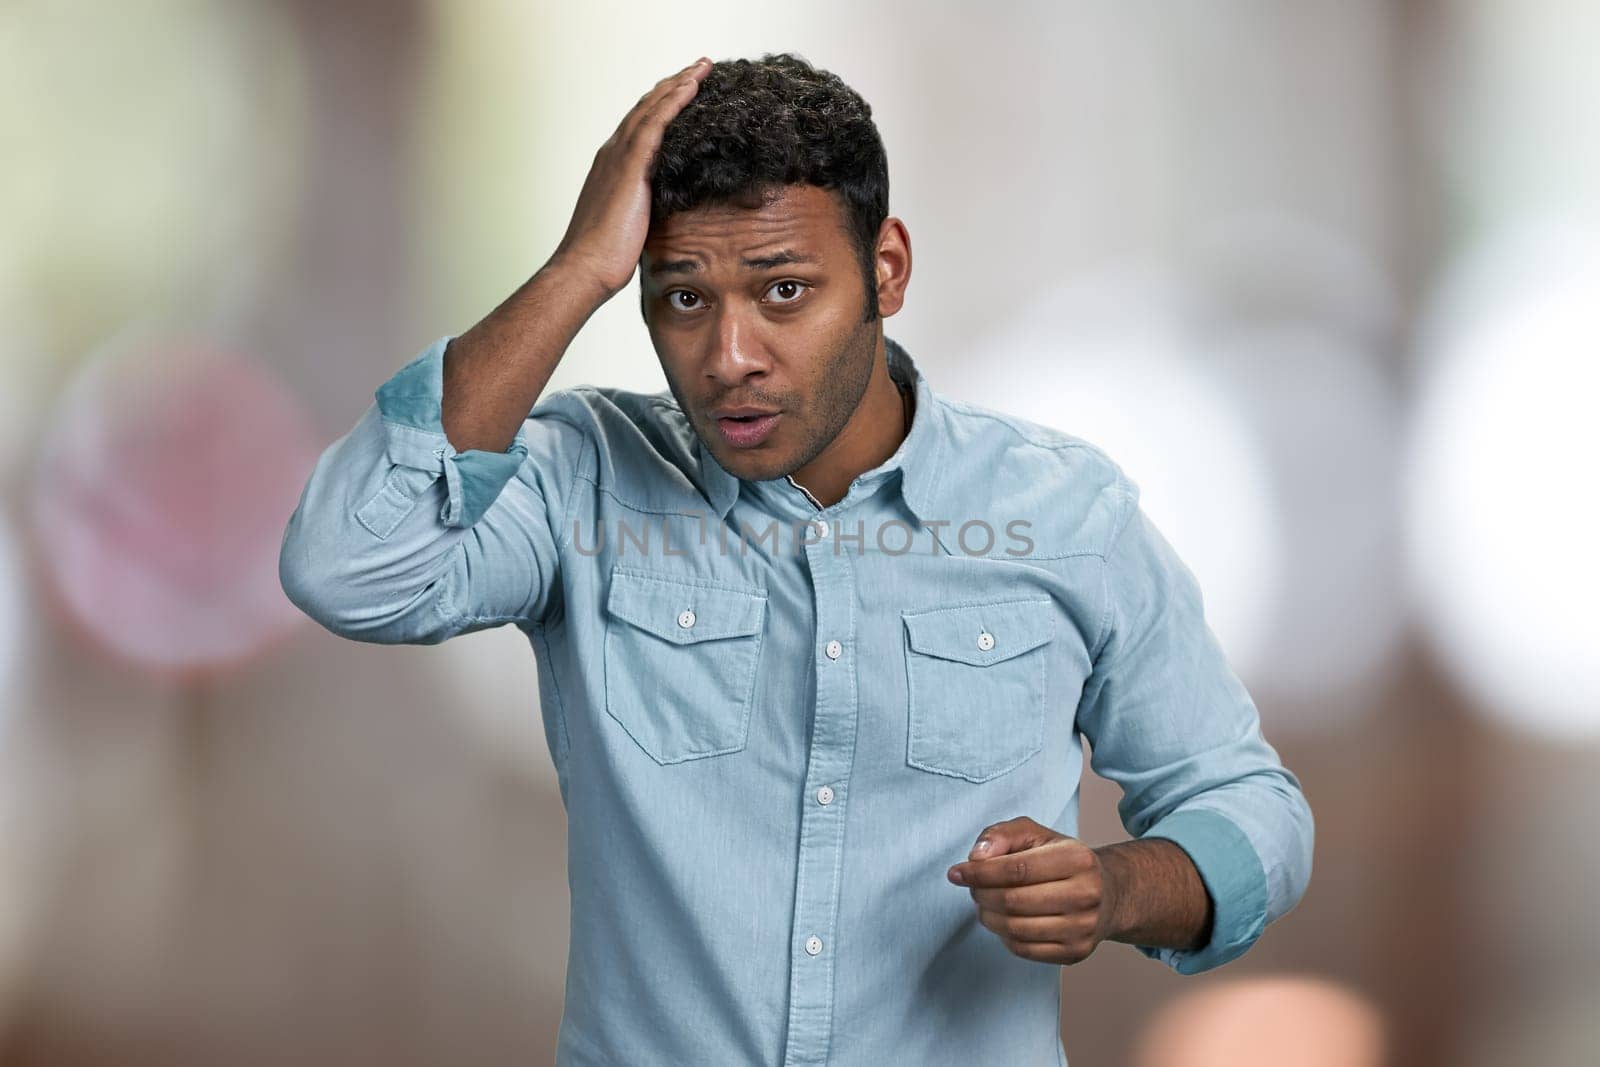 Sad young man touching his head because of headache. Abstract bokeh background.